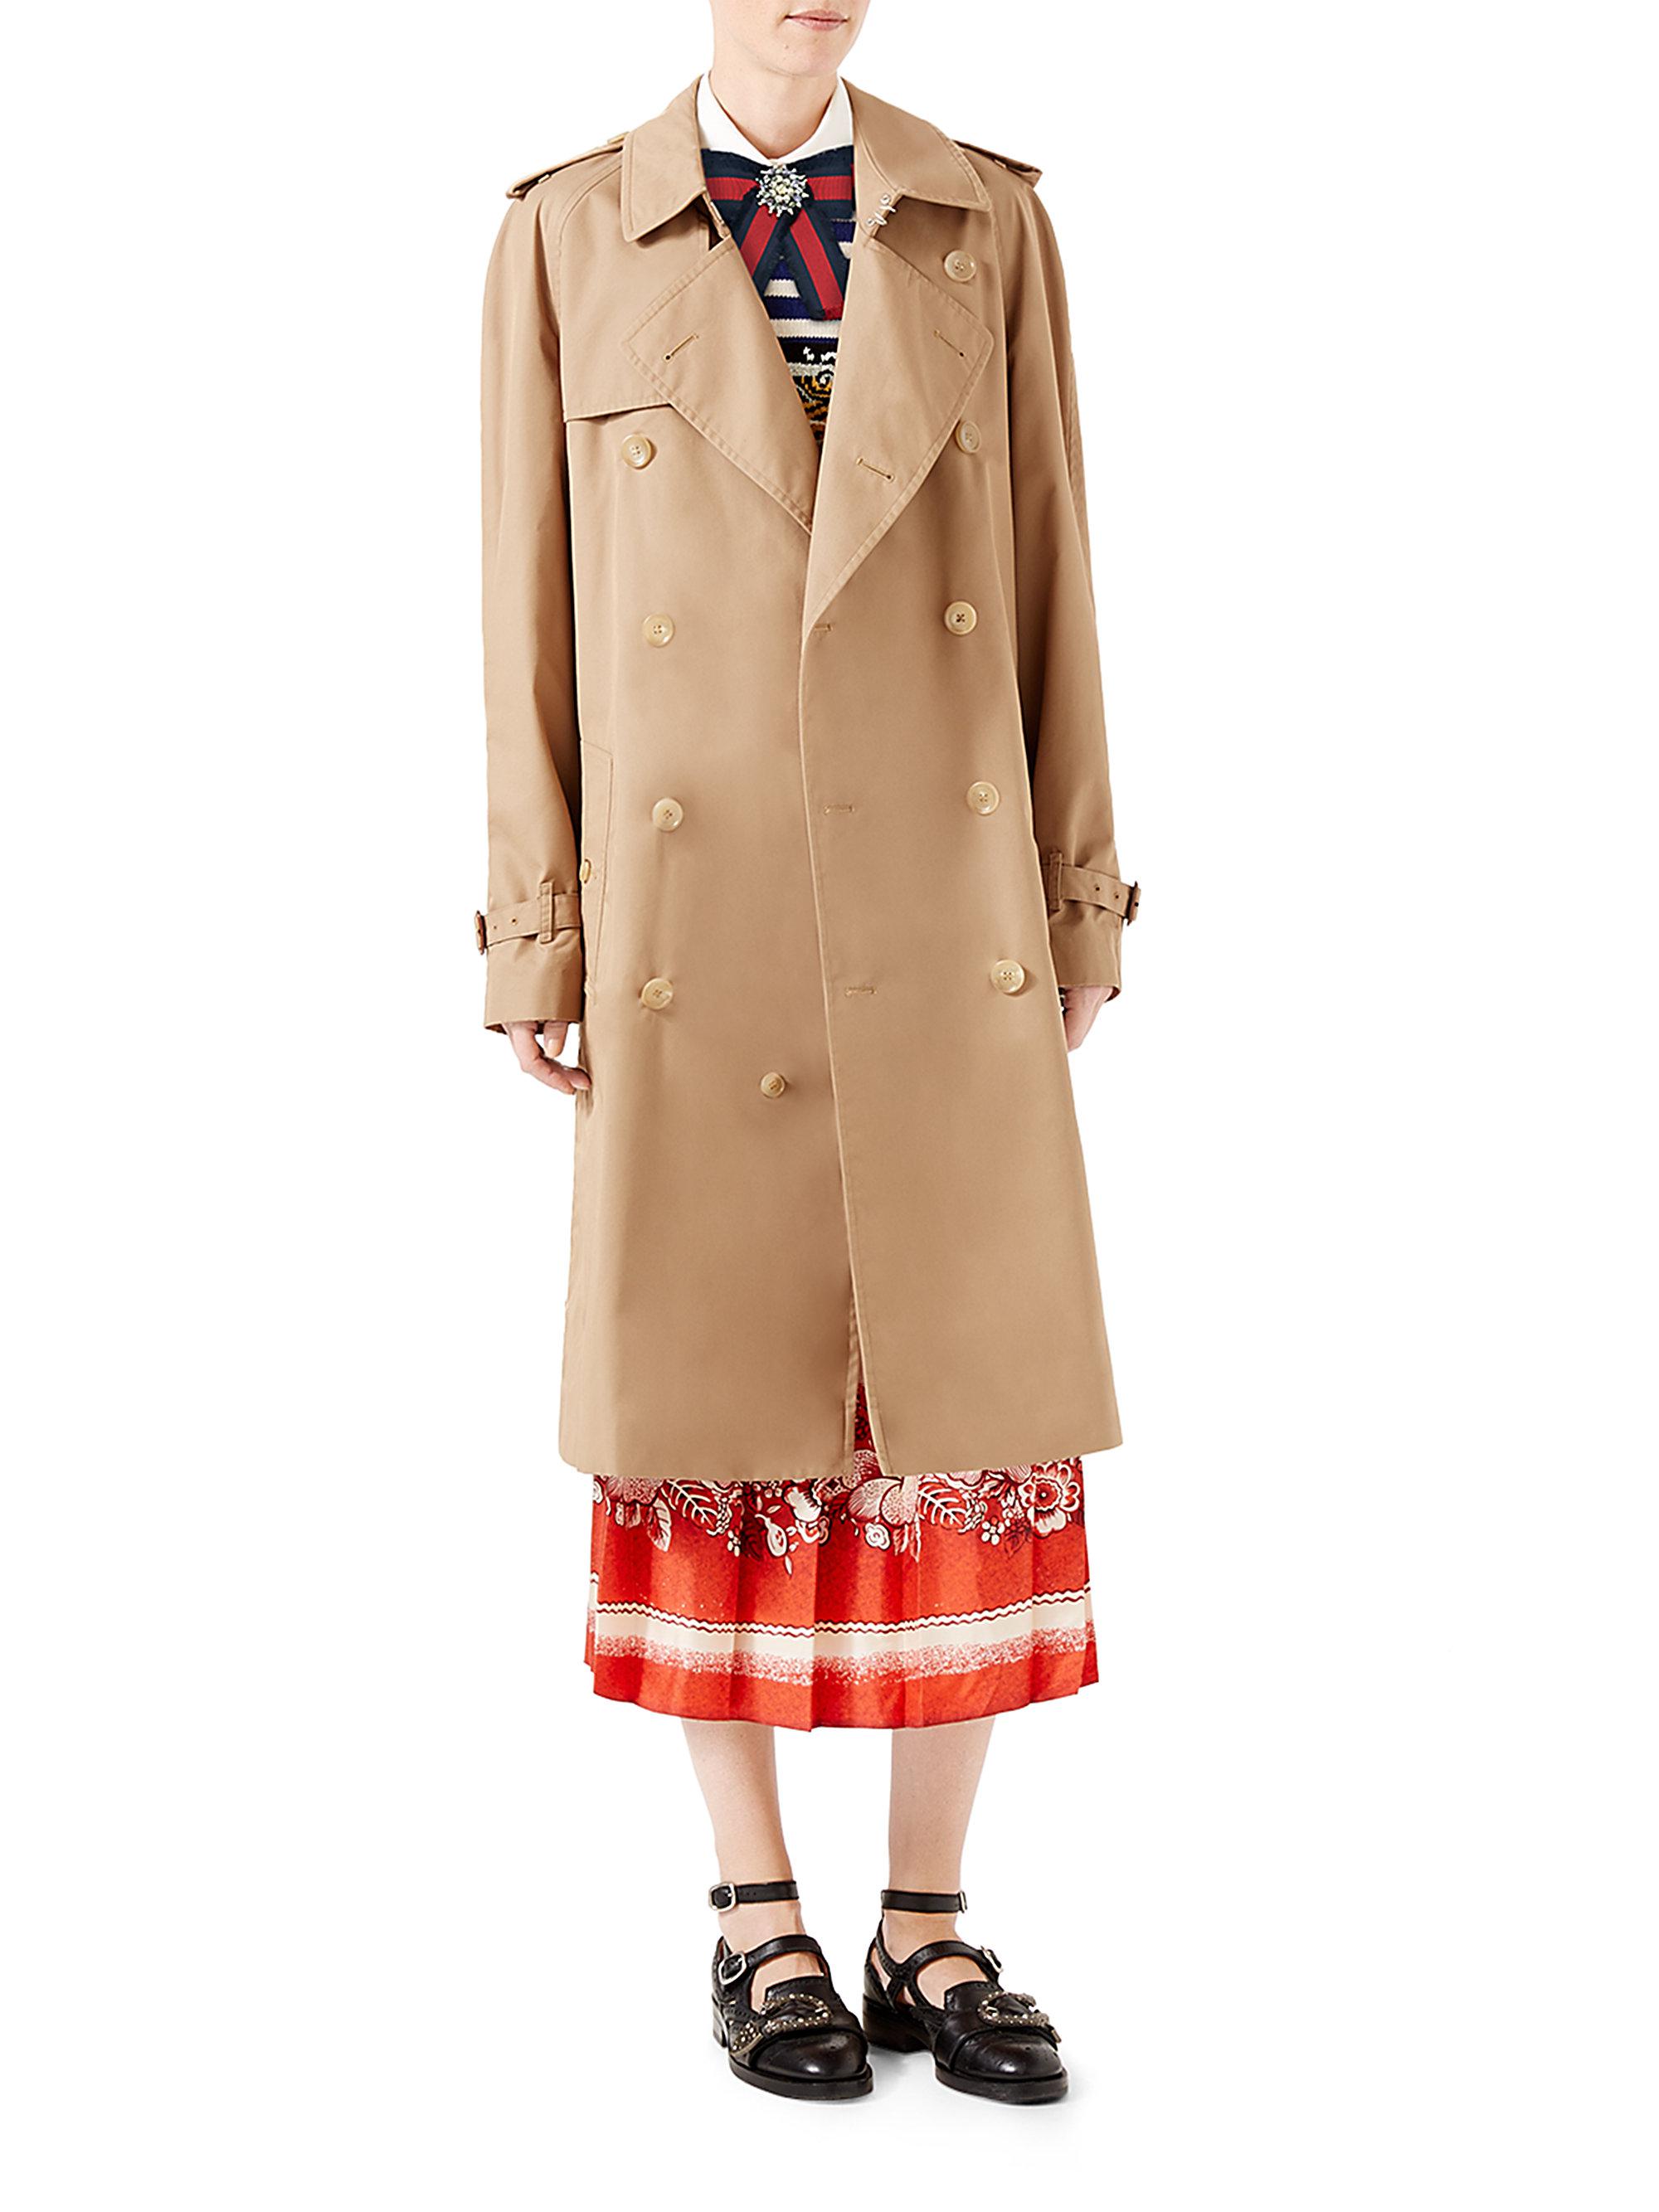 Lyst - Gucci Gabardine Embroidered Trench Coat in Natural